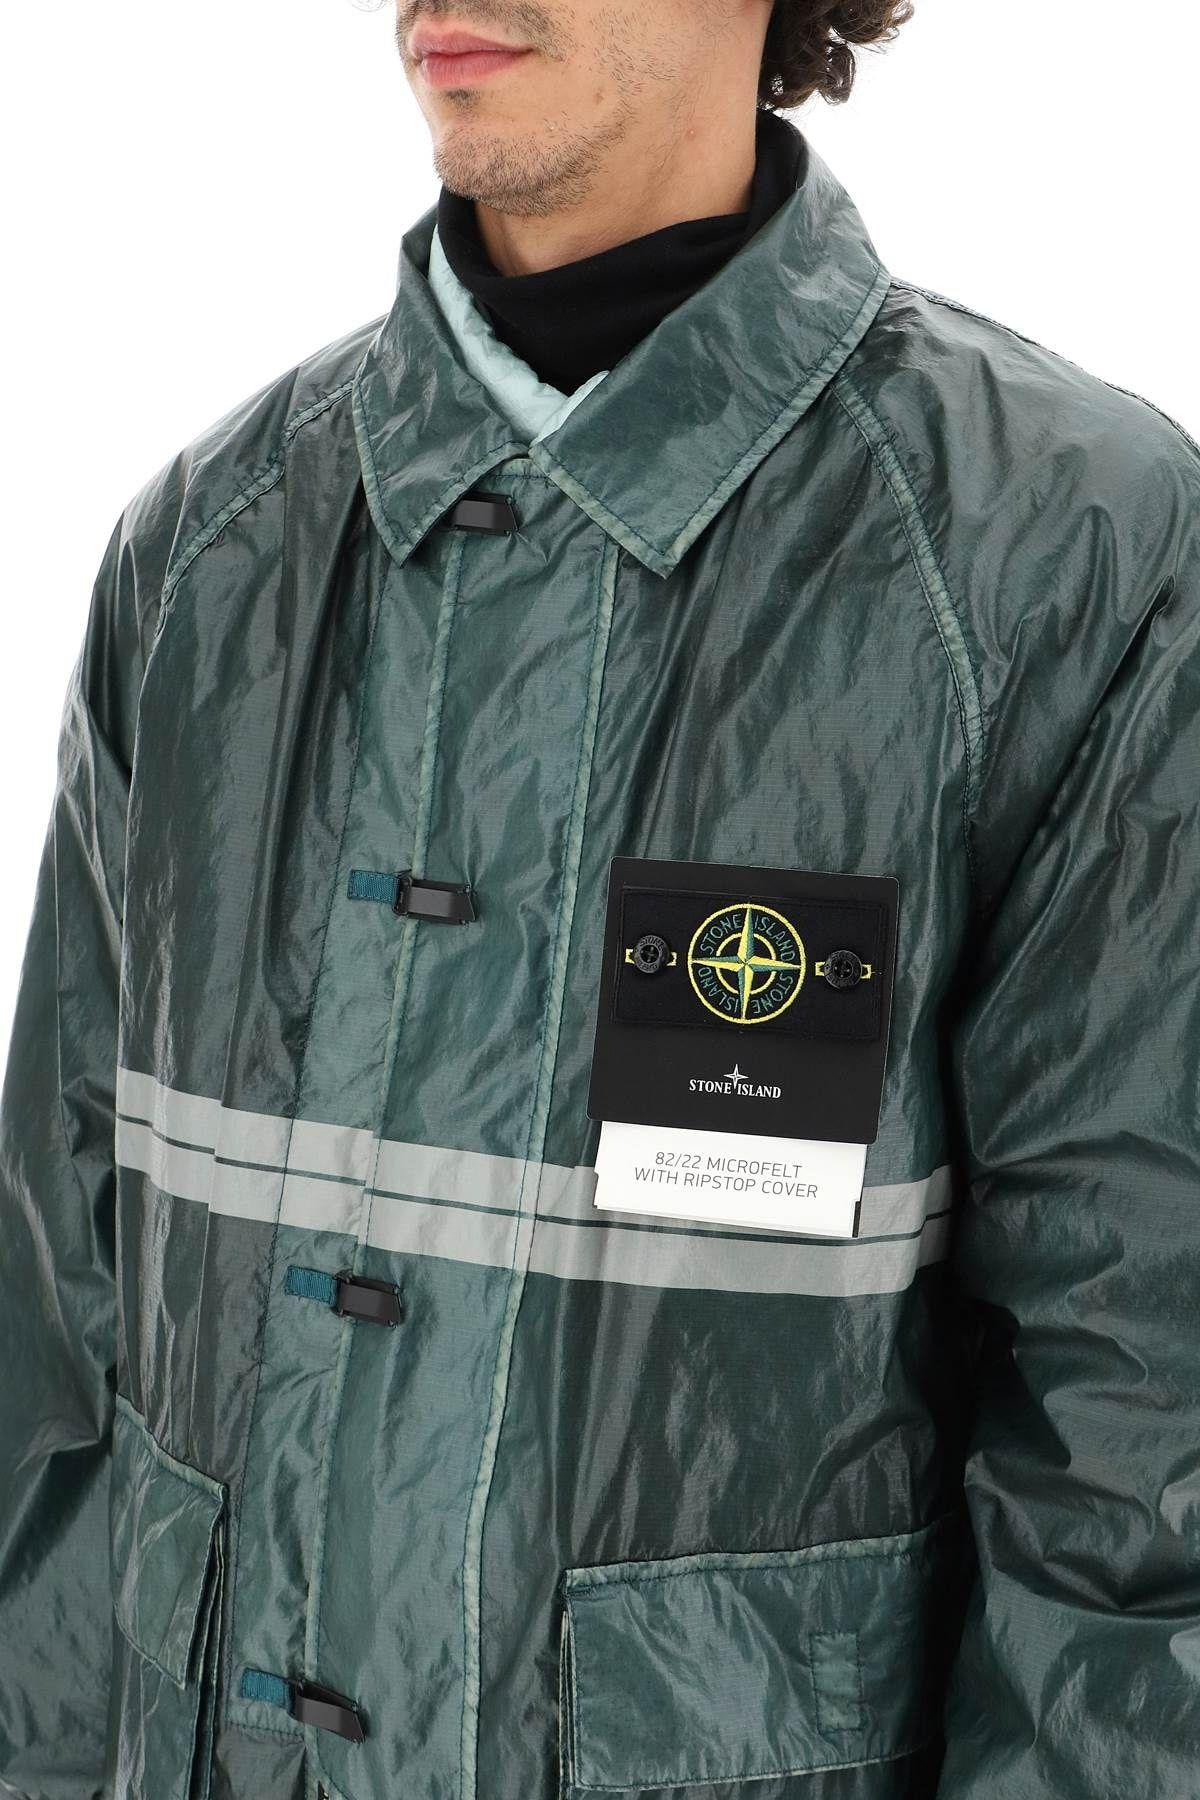 Stone Island 82/22 Microfelt With Ripstop Cover Jacket